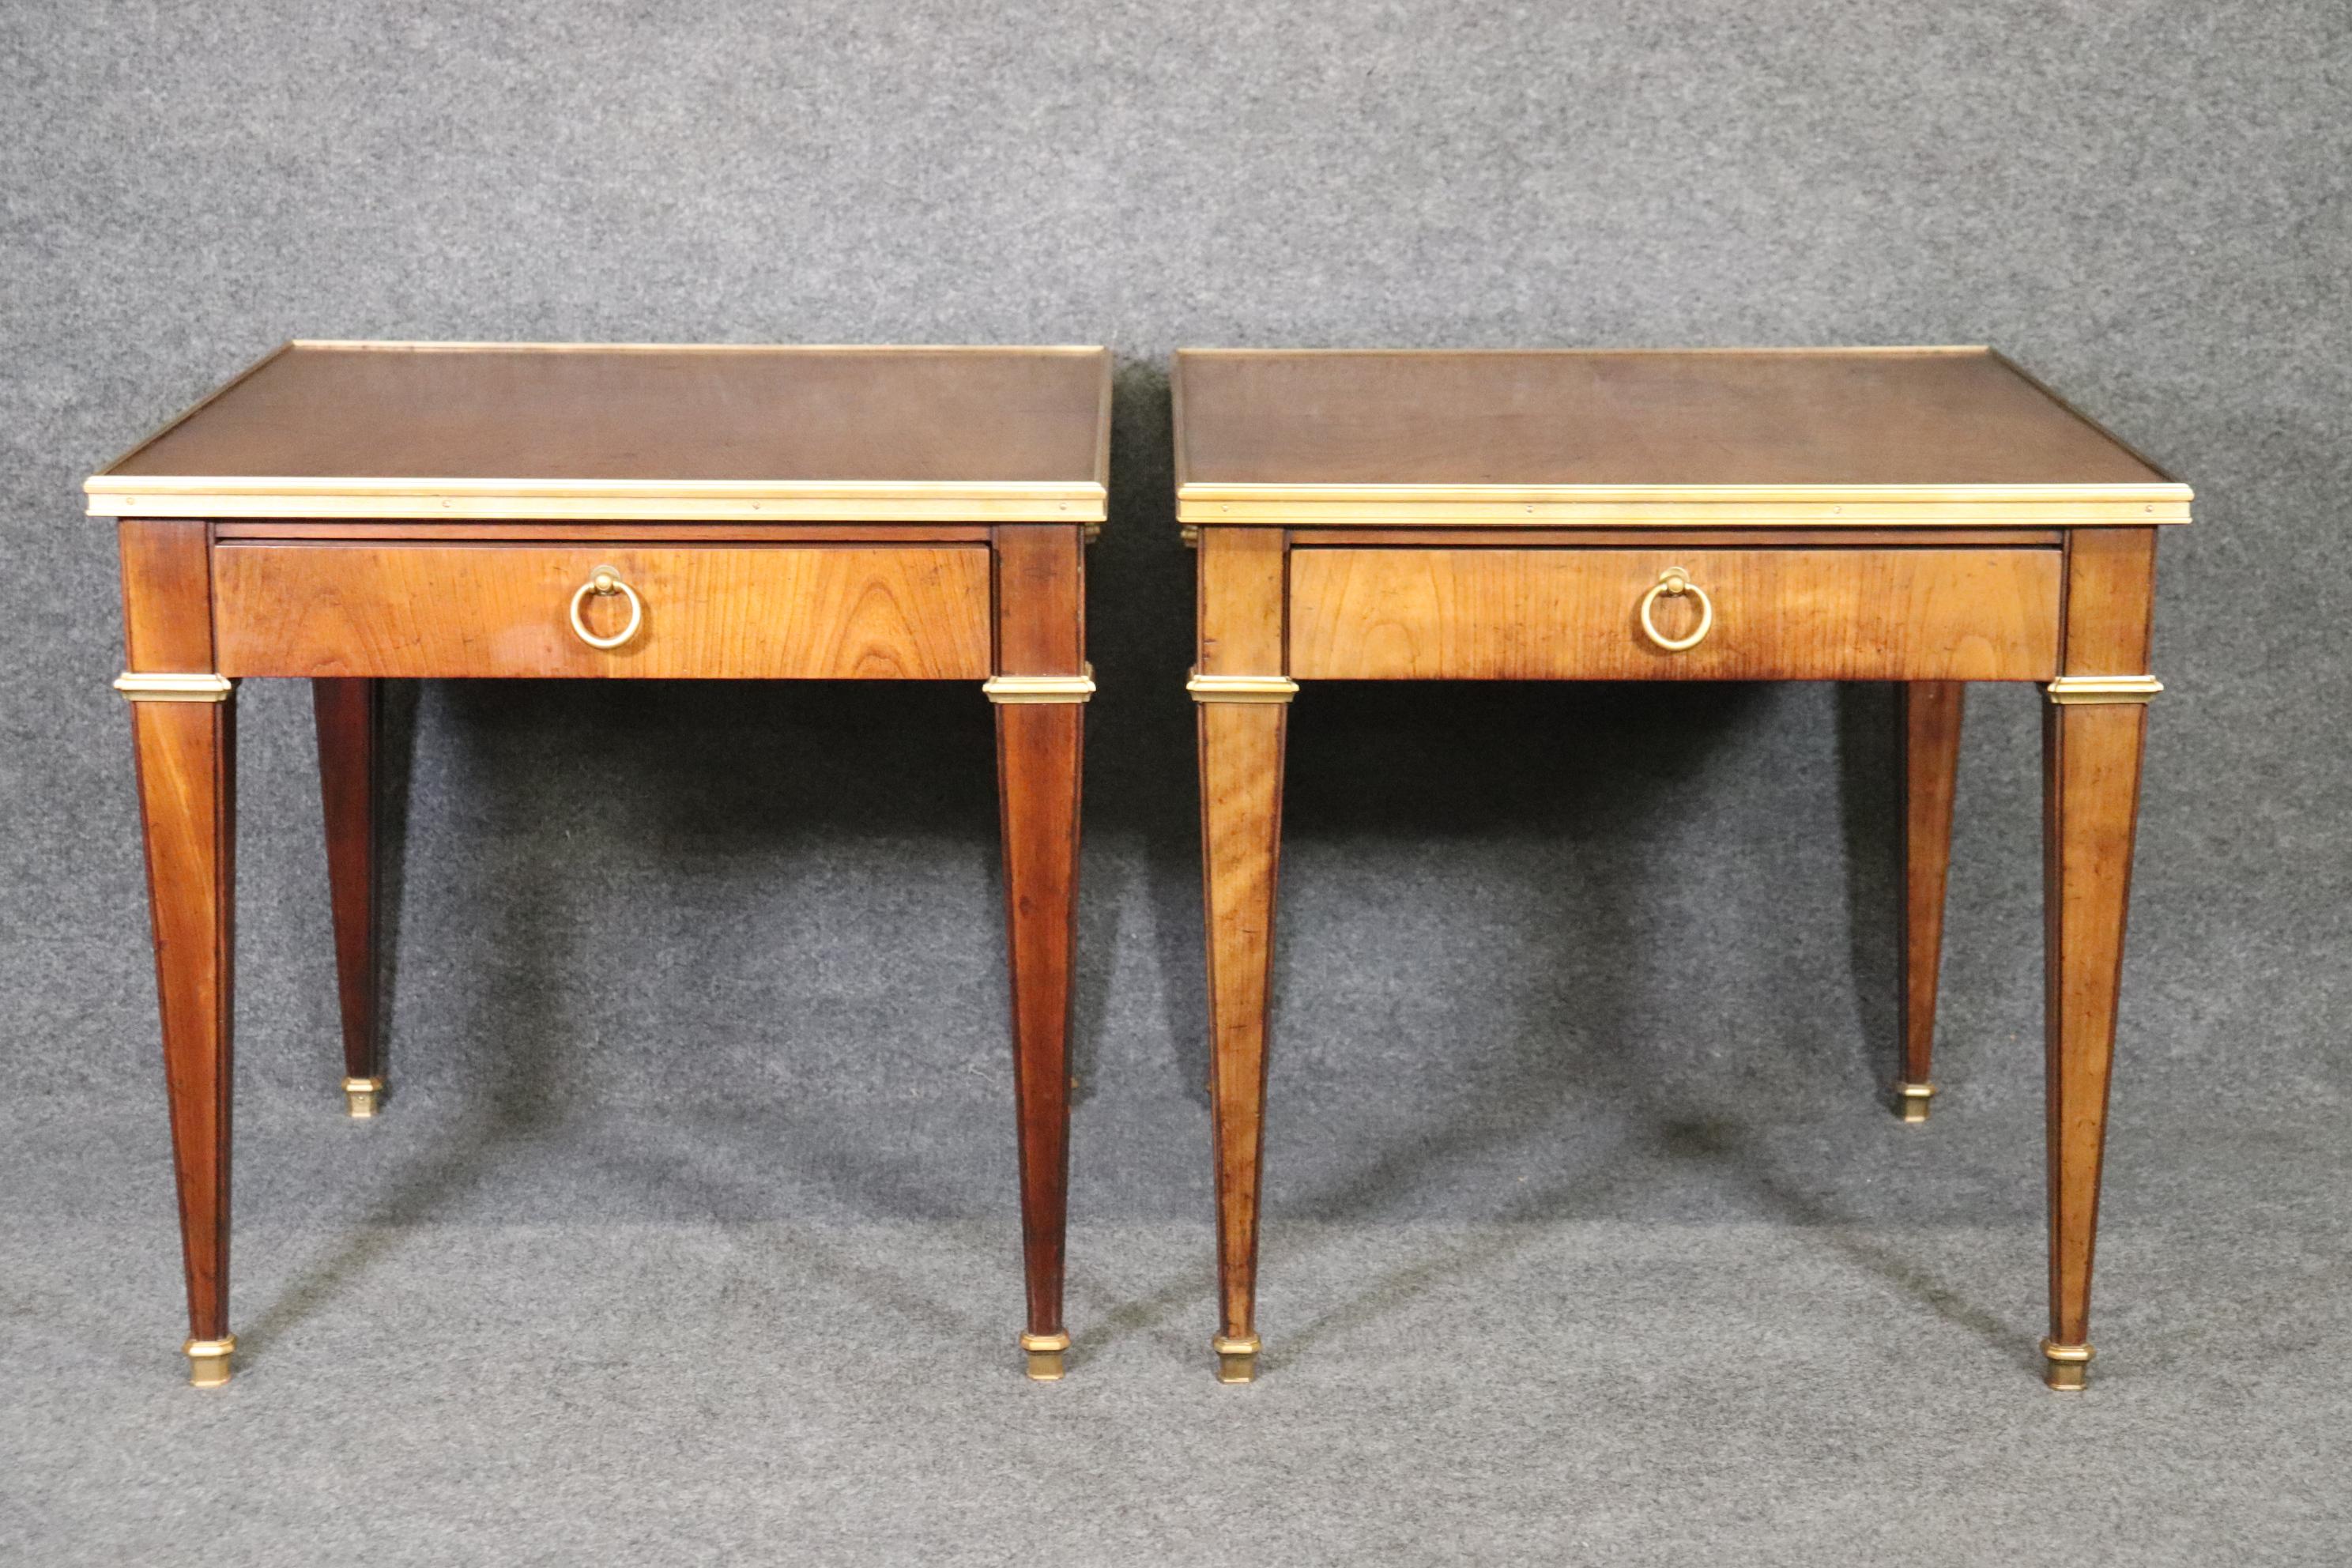 Dimensions- H: 23.25in W: 24.25in D: 27.25in
This is an exceptional pair of Directoire Style baker side tables, end tables. they are equipped with brass hardware and are made from the highest of quality. Perfect for the ends of a sofa or next to